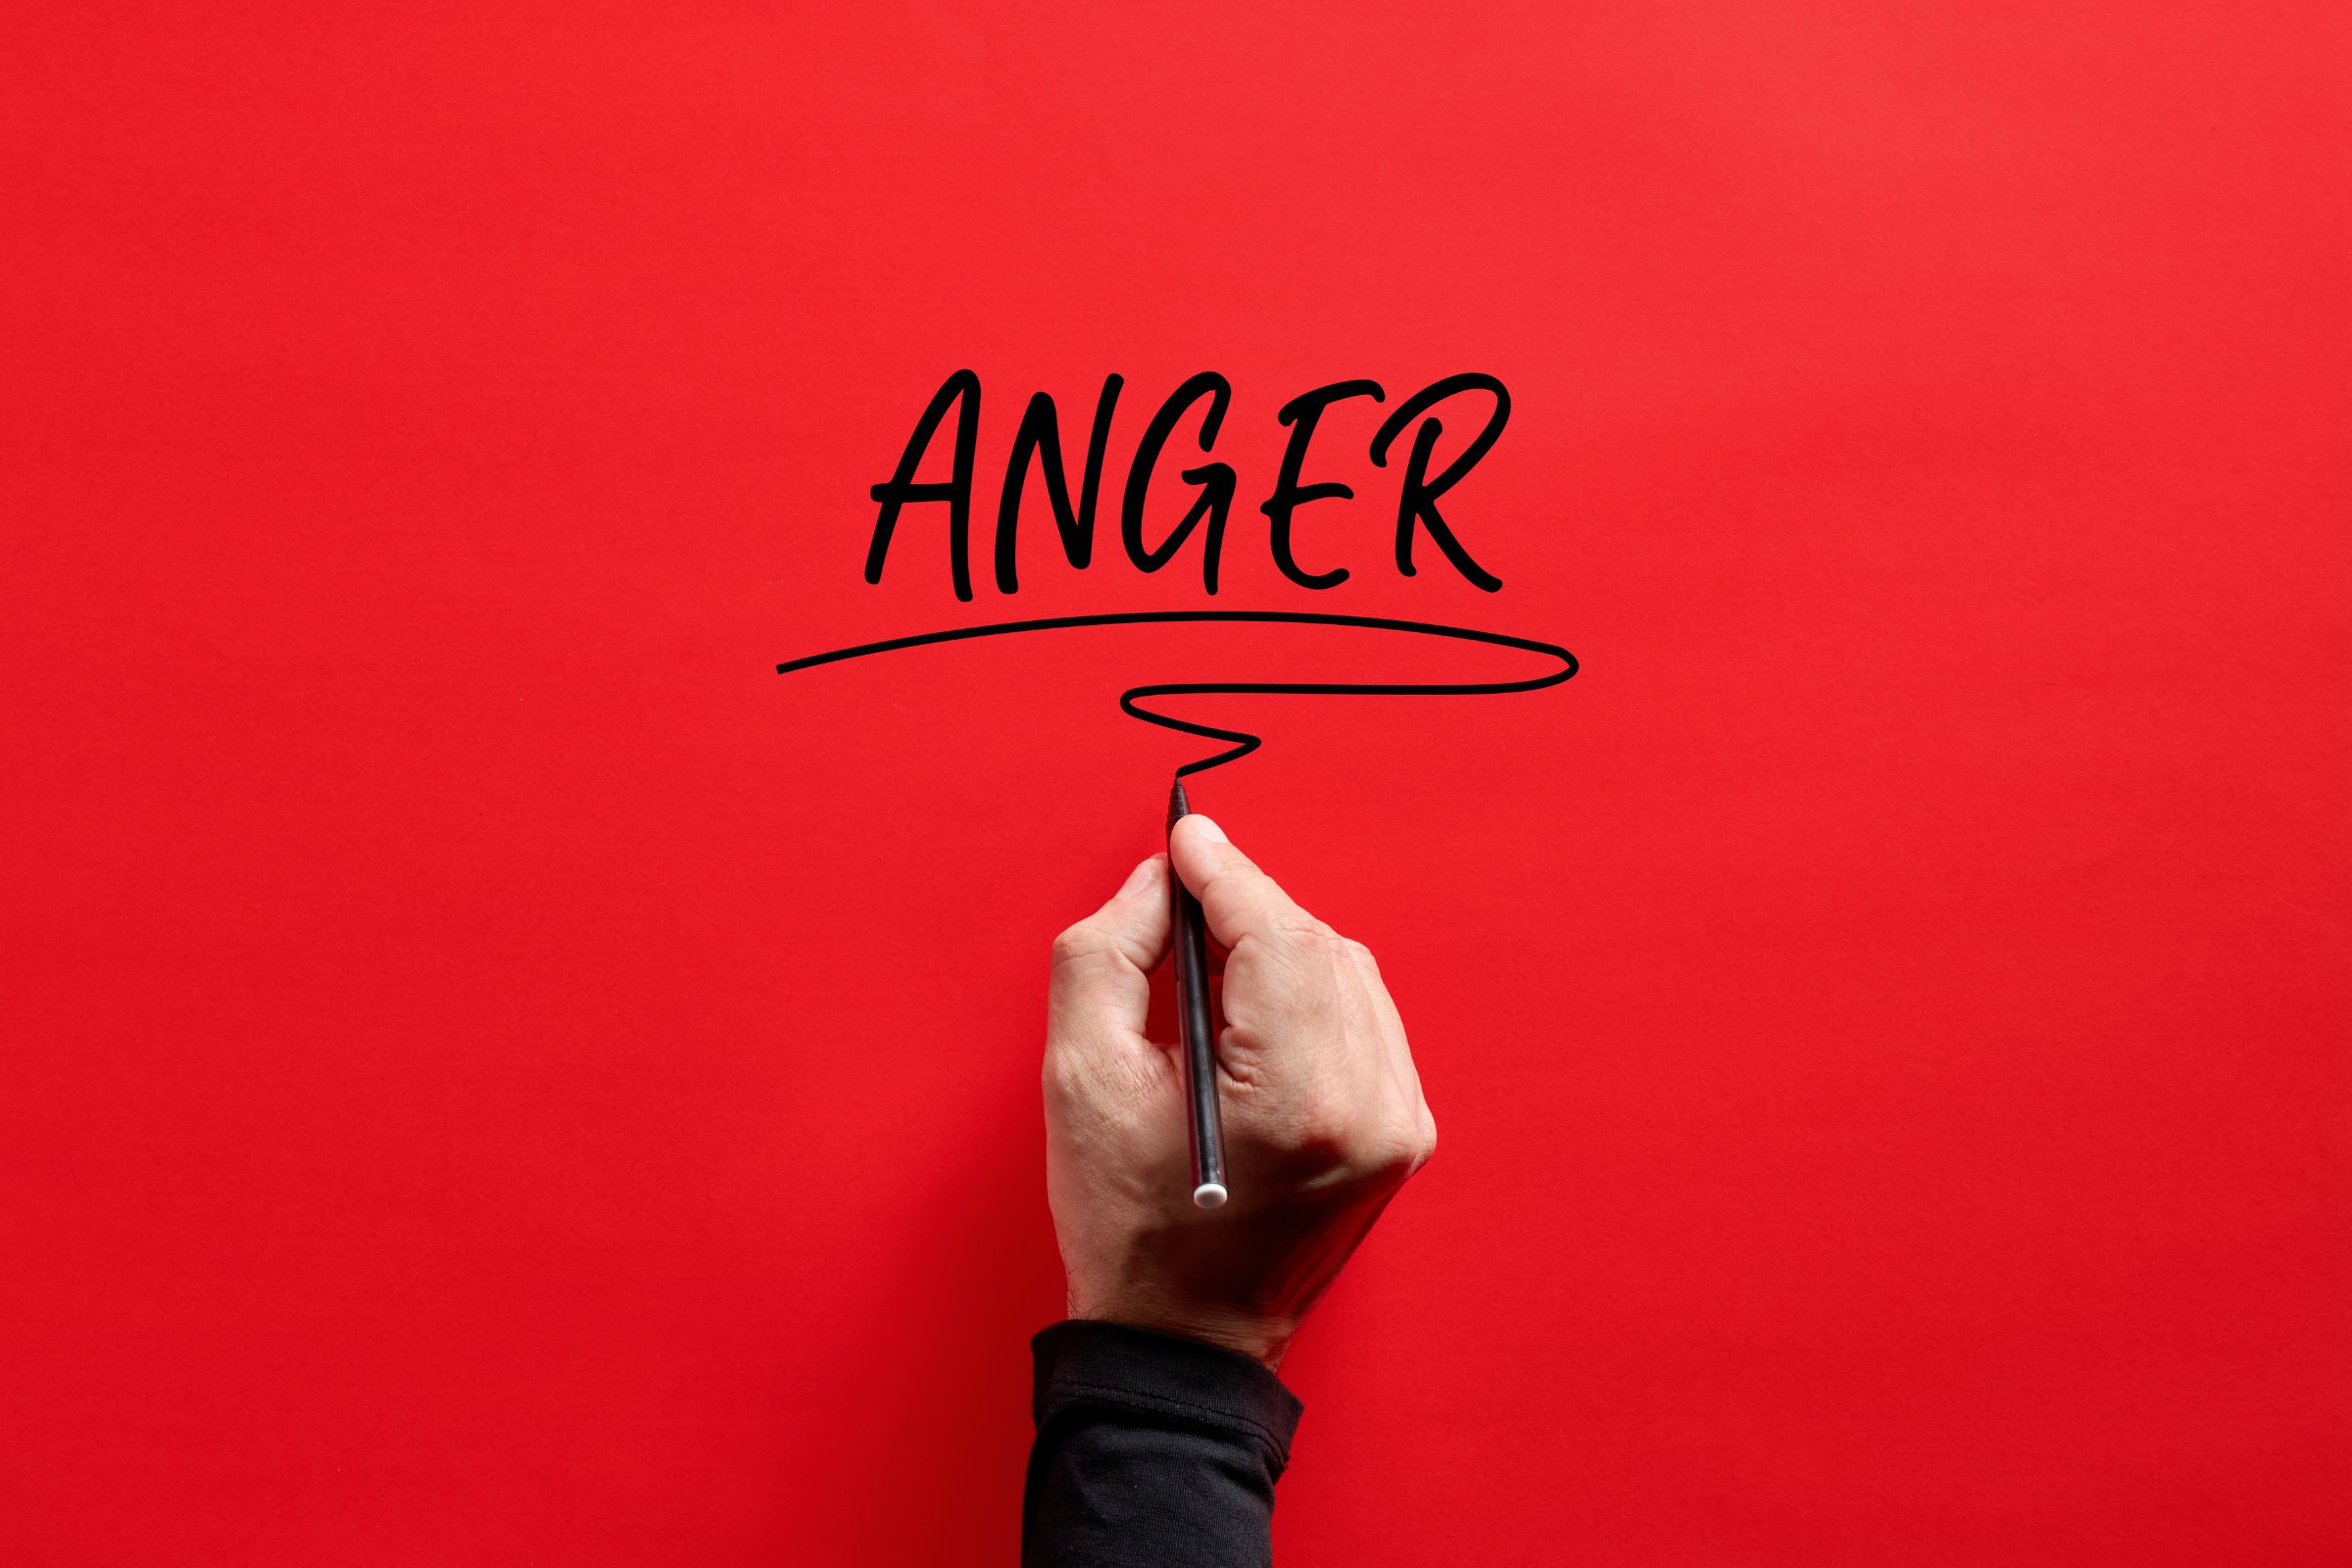 Anger Management Programs in New Jersey: What You Need to Know